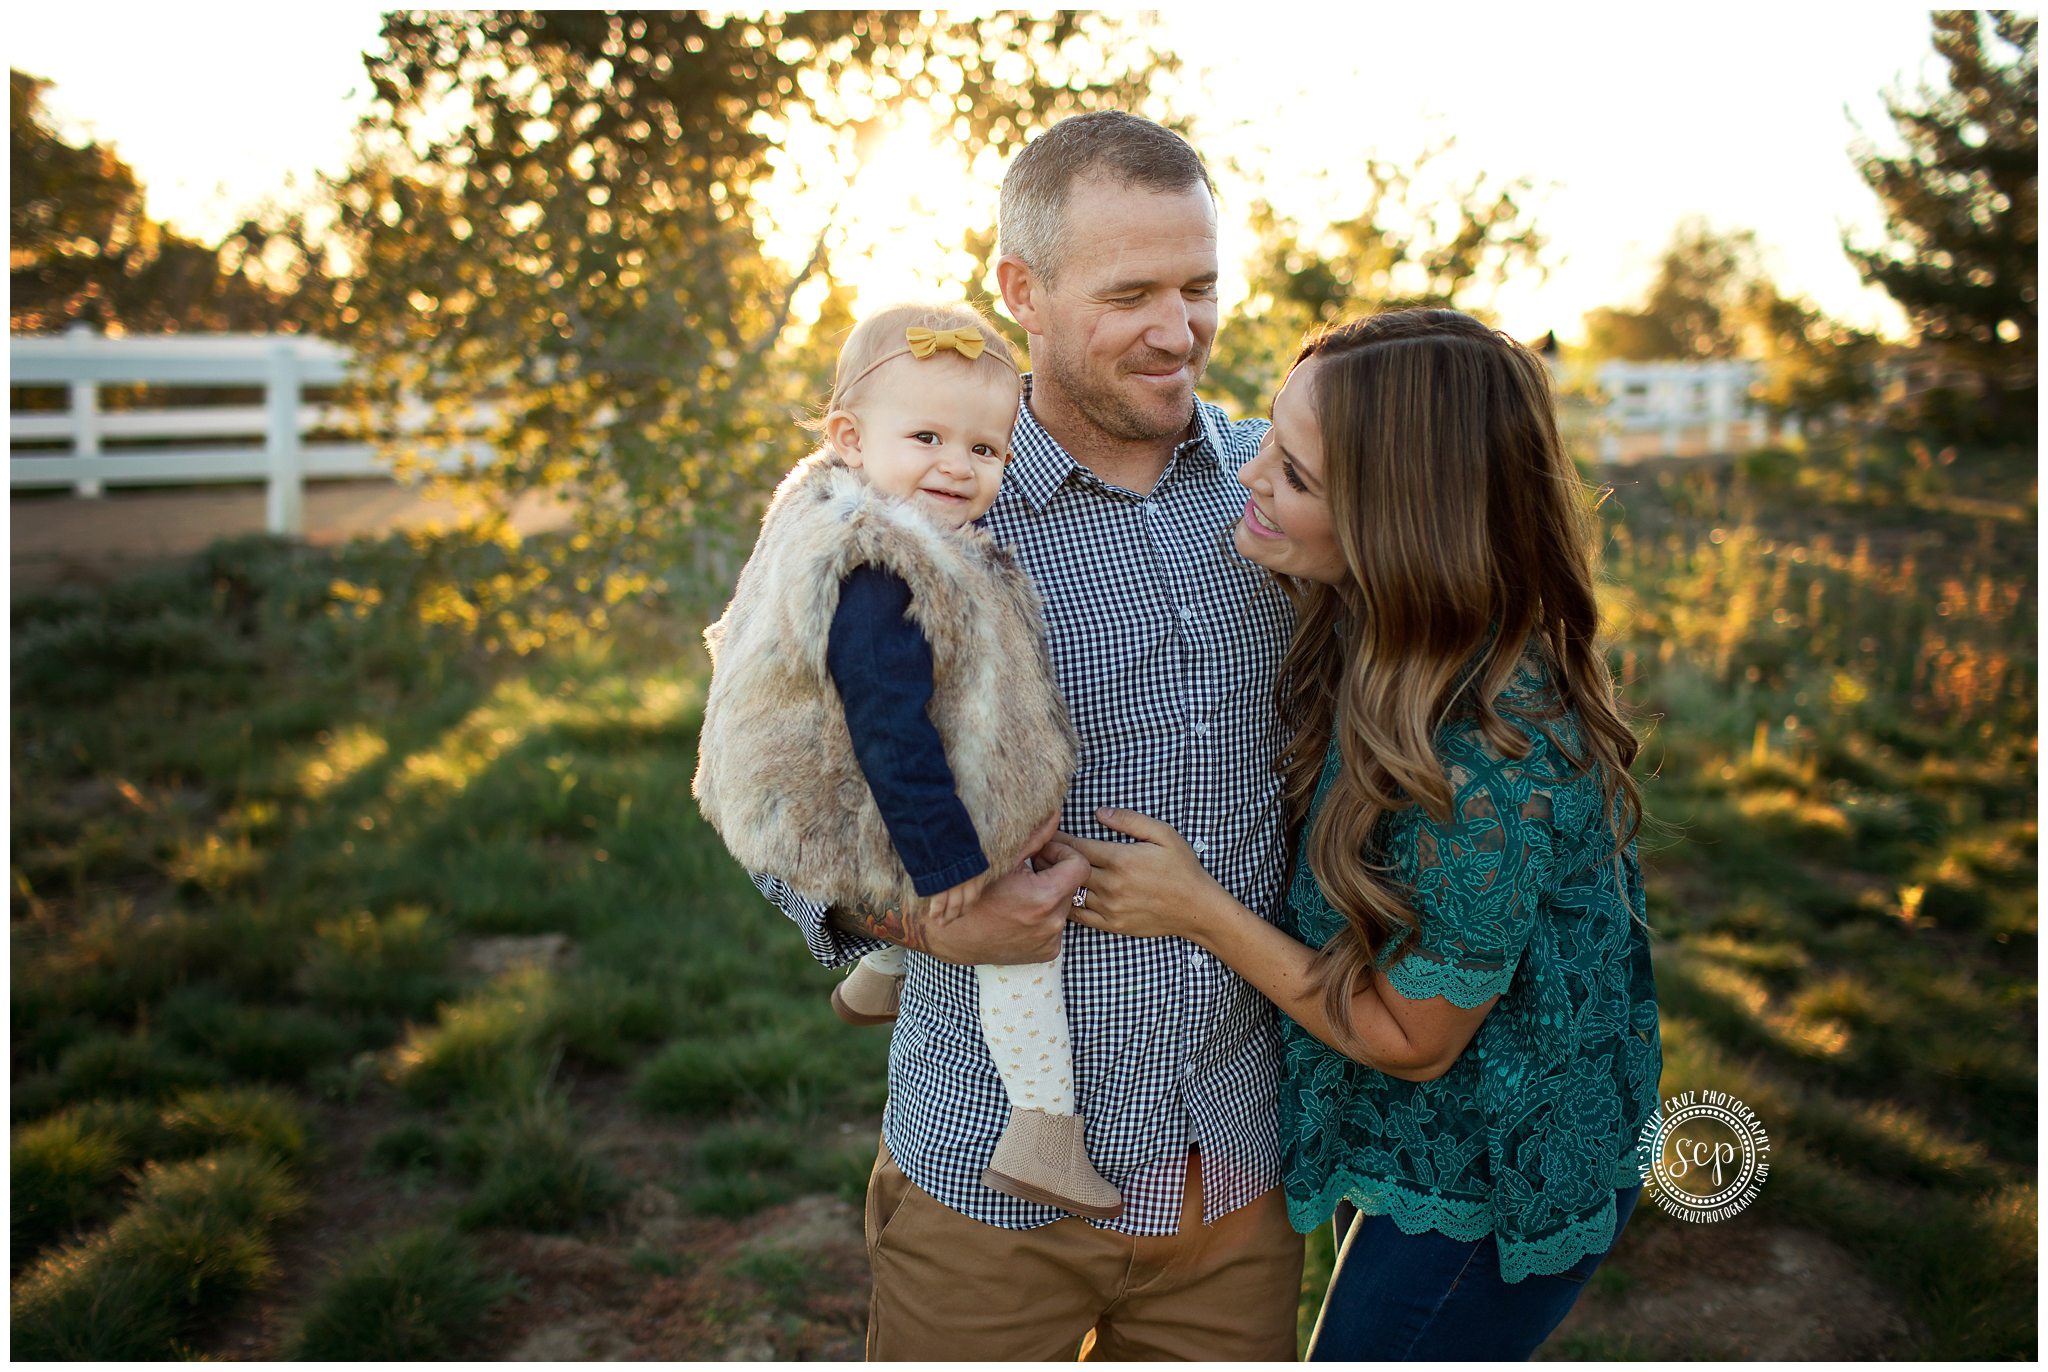 Candid family photo inspiration. Photos by Stevie Cruz Photography